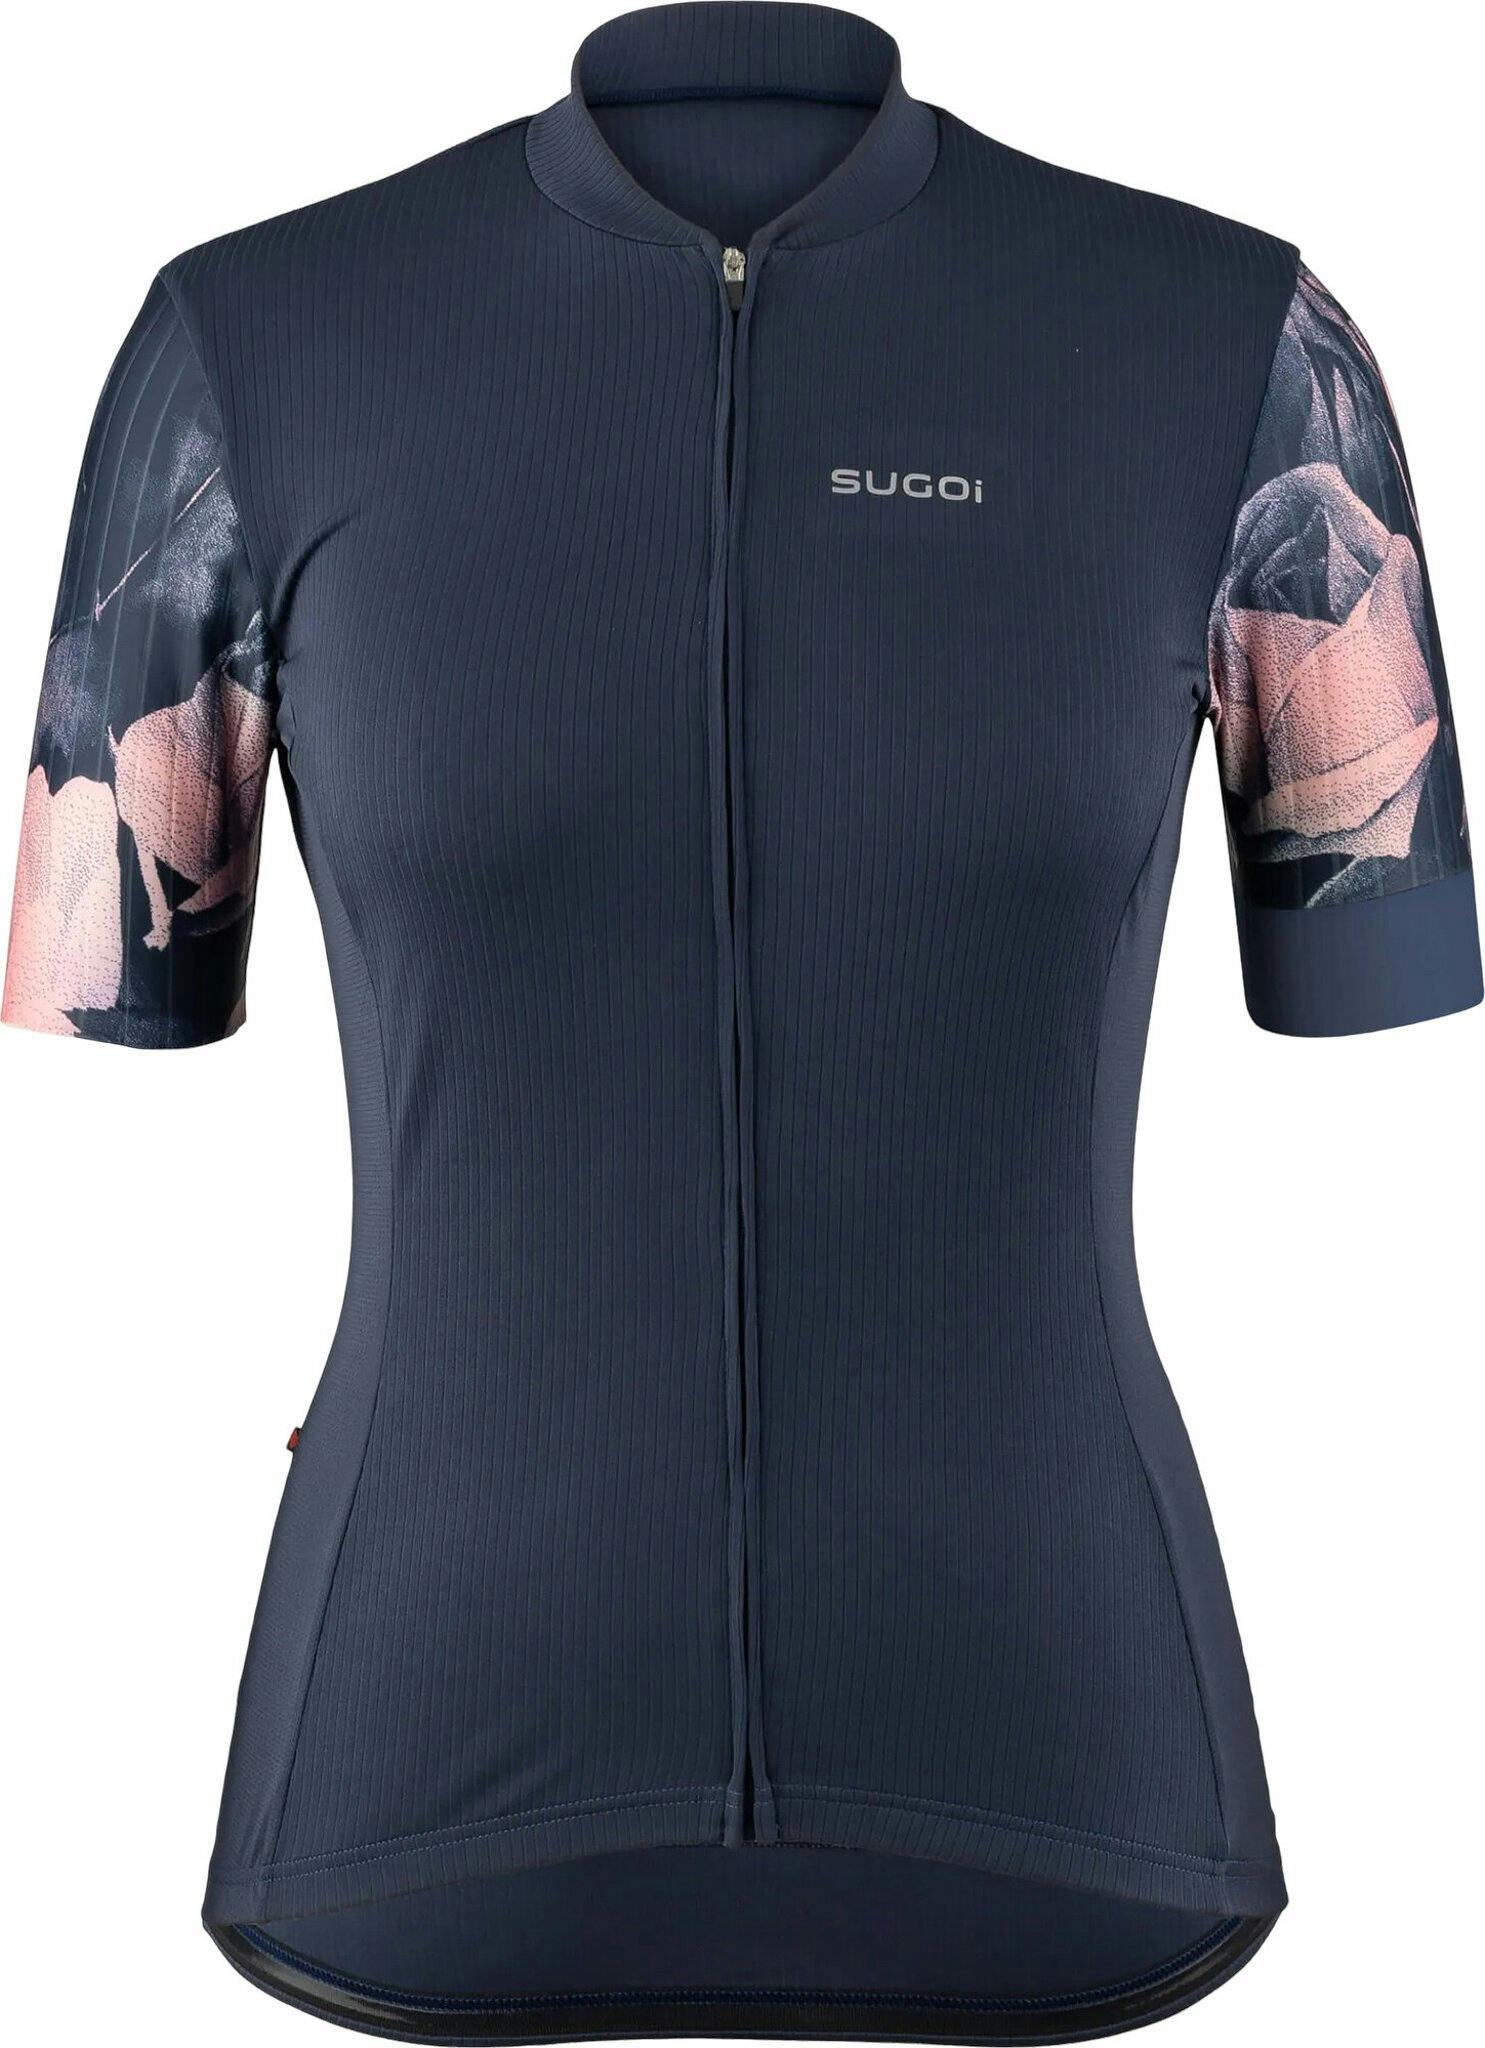 Product image for Evolution Jersey - Women's